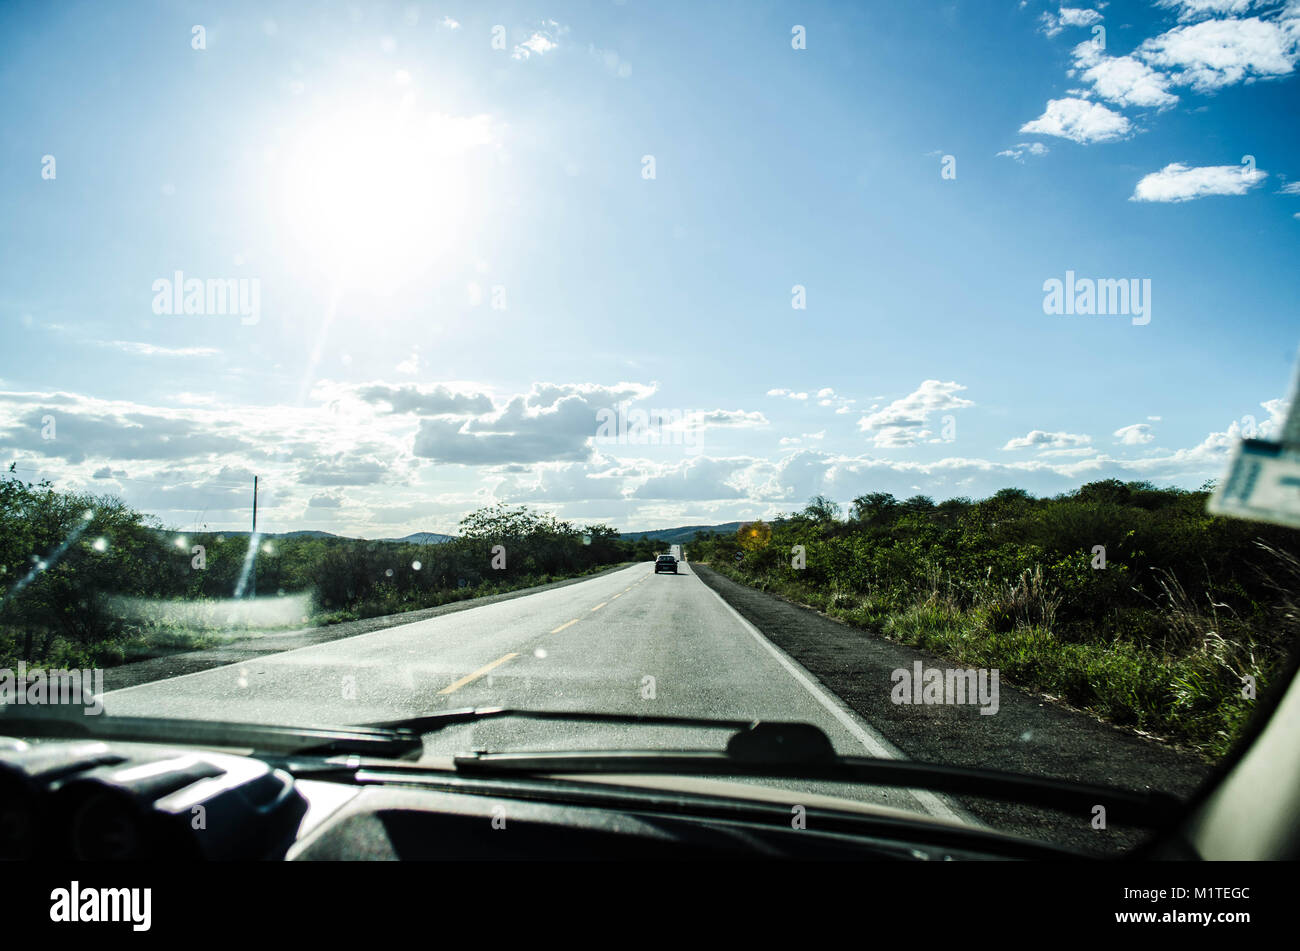 View of a highway full of greenery on both sides inside a car and with the strong sun and blue sky Stock Photo